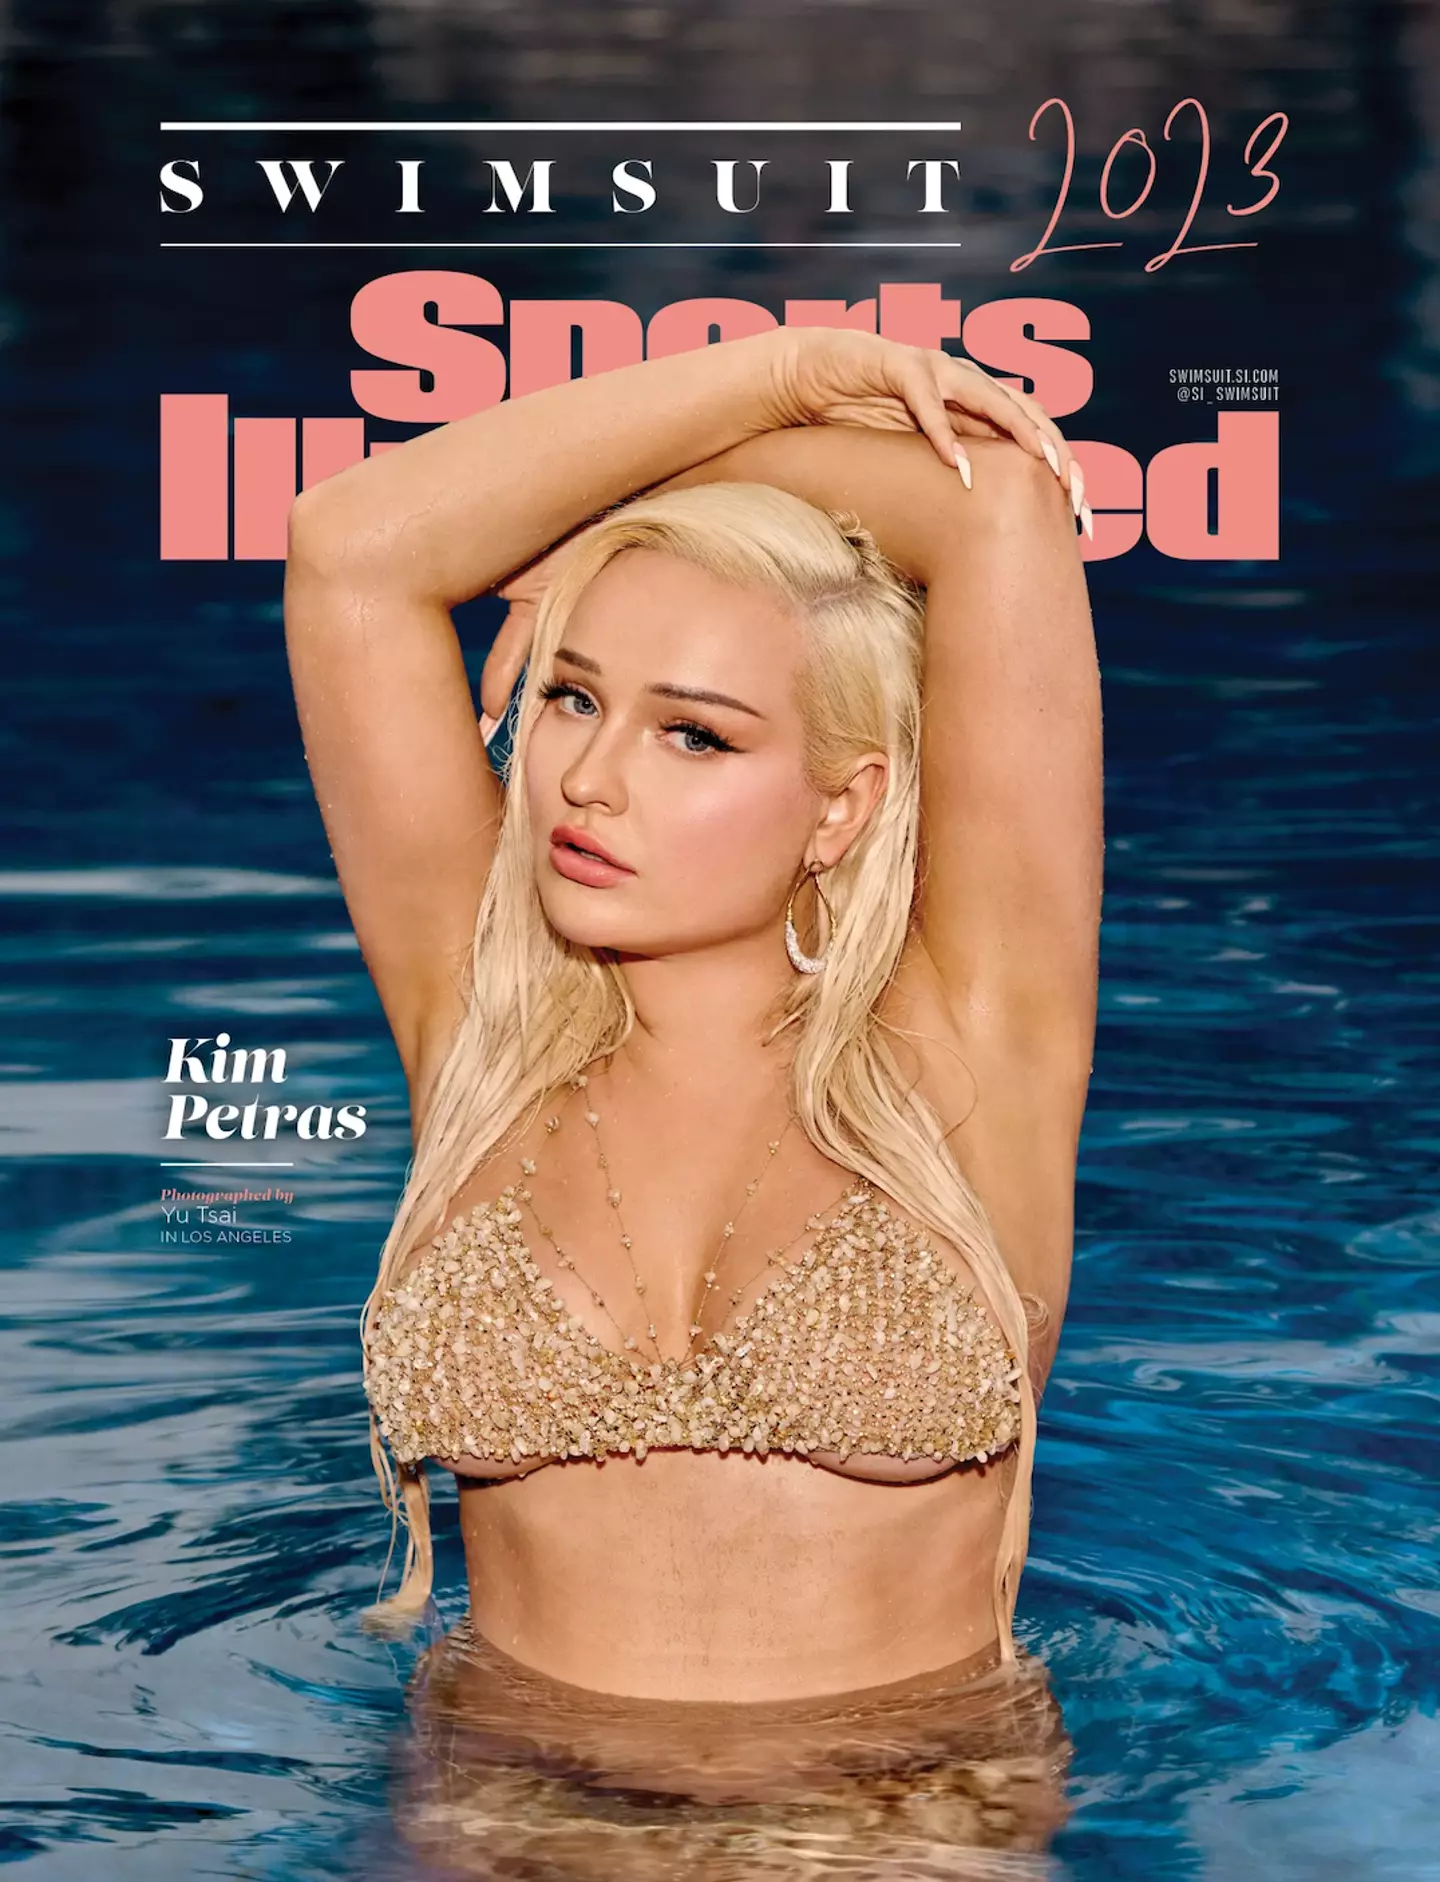 Kim Petras is only the second-ever transgender woman to feature on the cover.